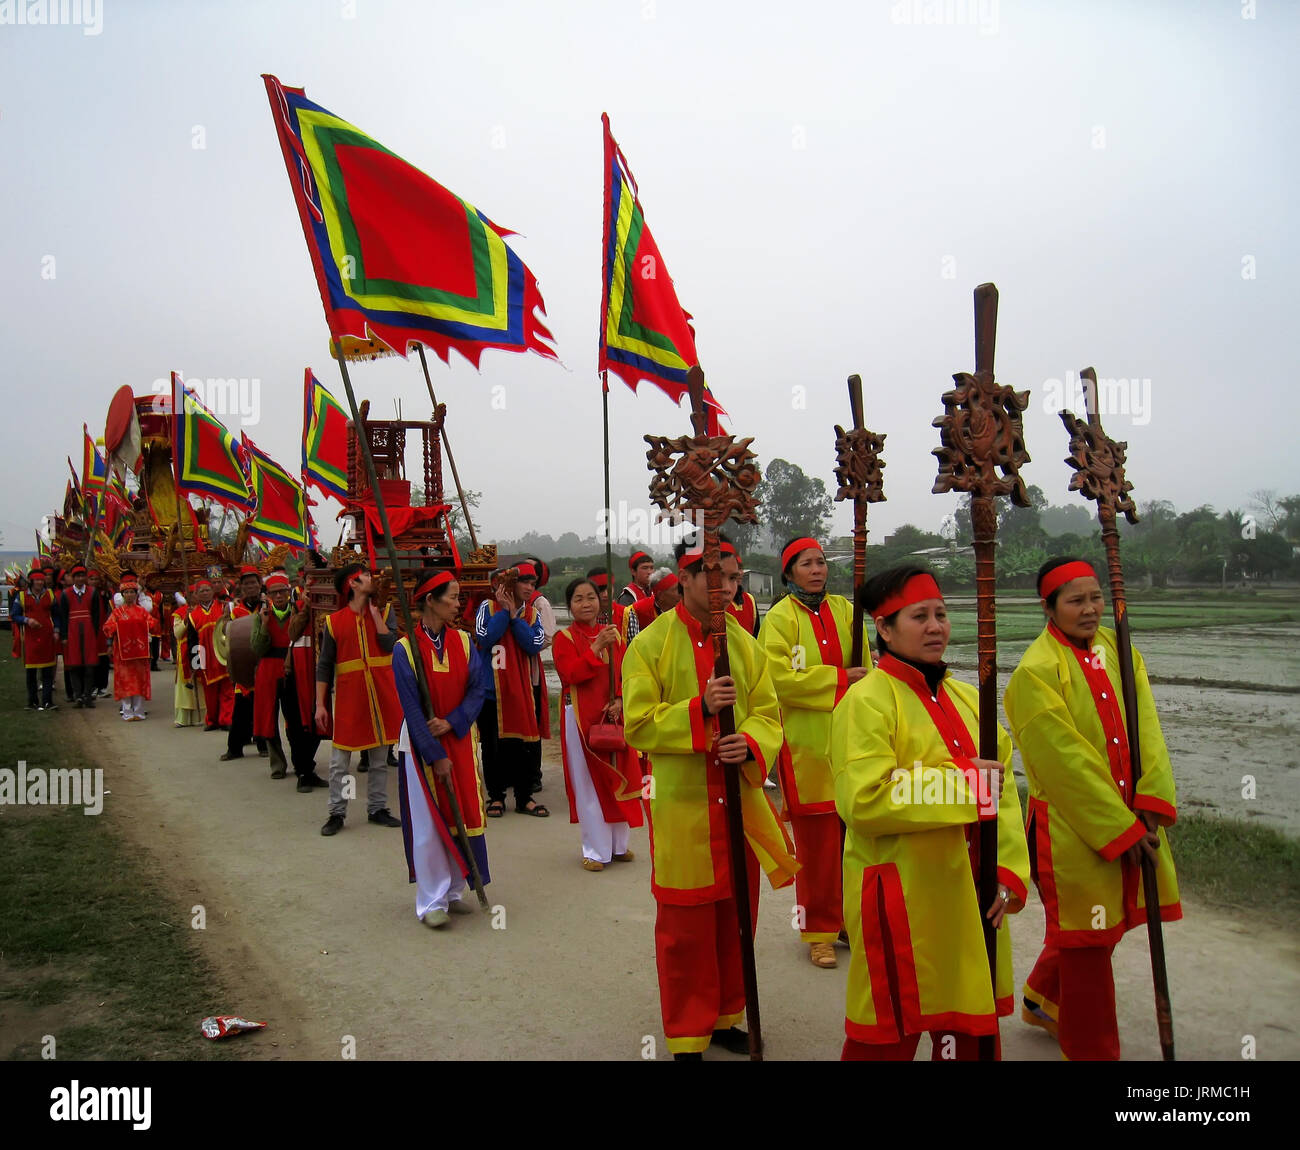 HAI DUONG, VIETNAM, March, 4: Group of people in traditional costume ...